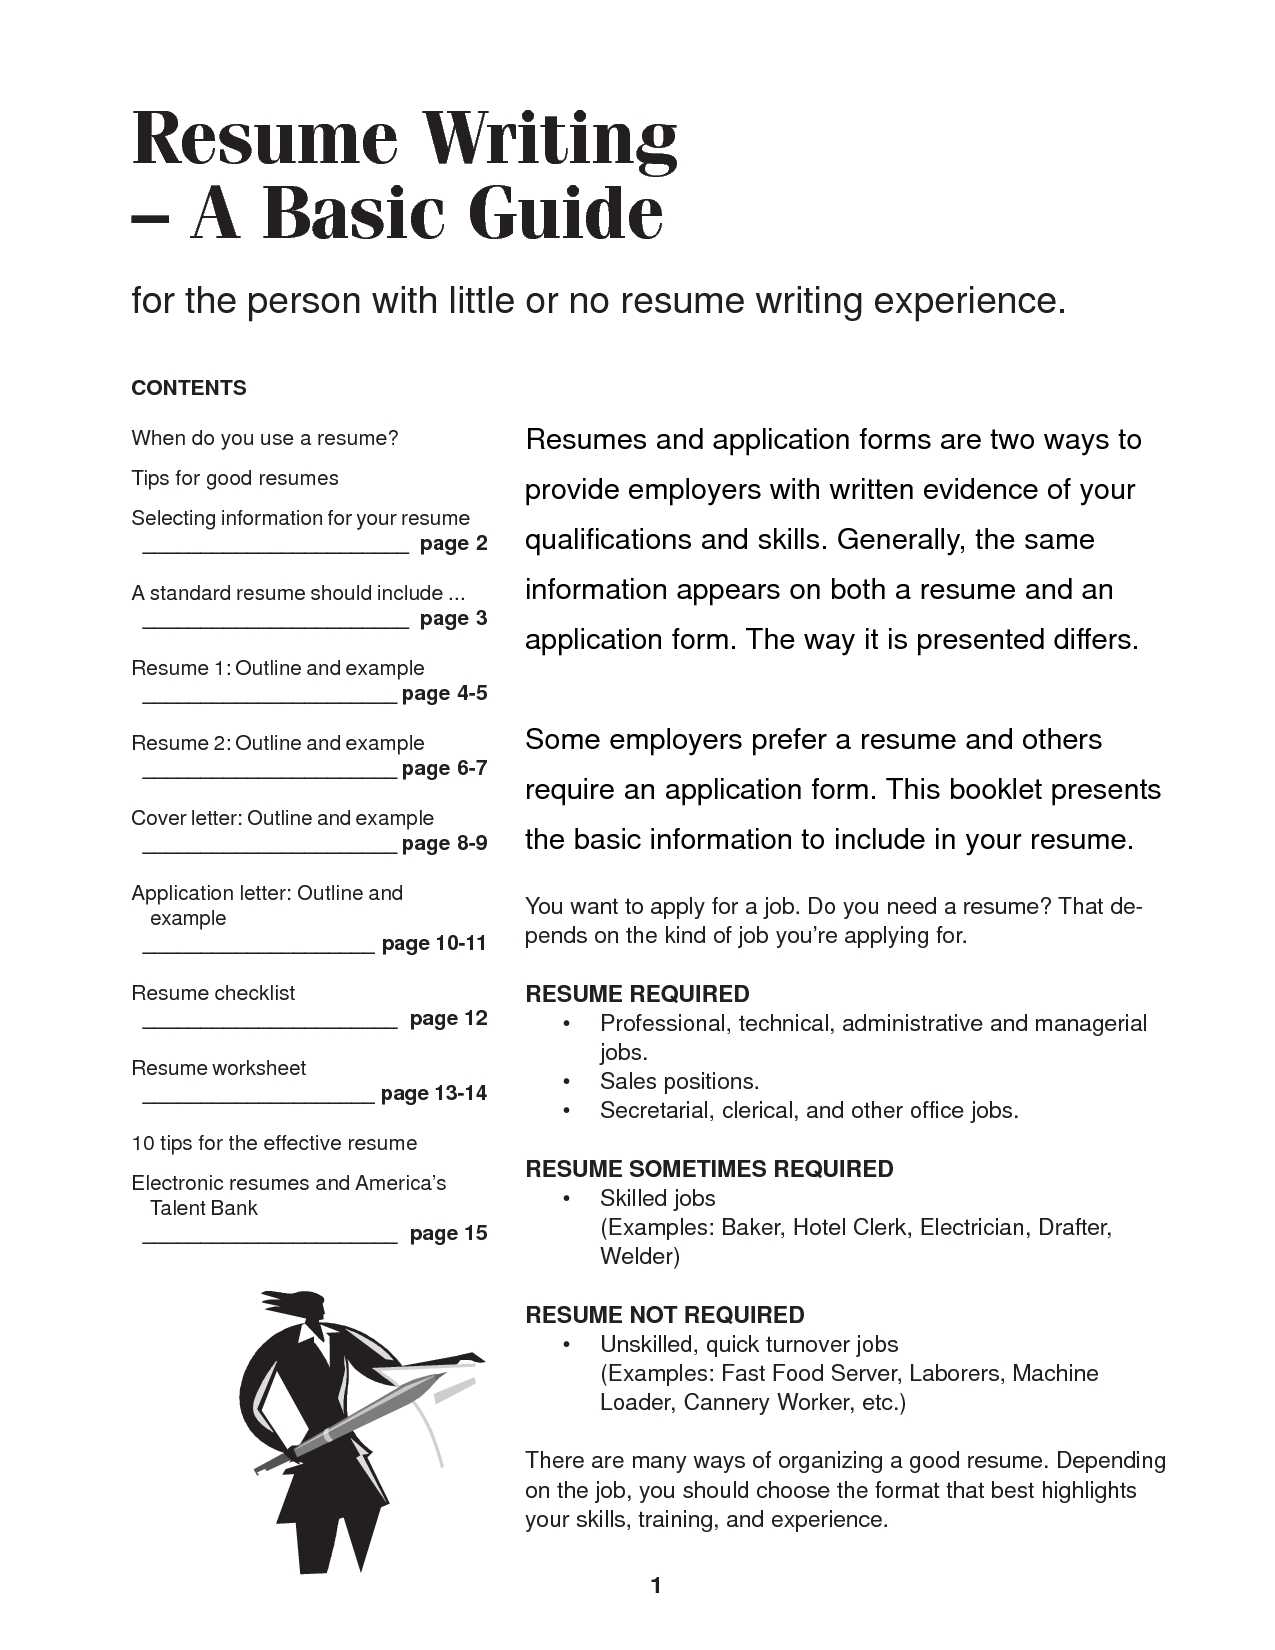 Building Self Esteem Worksheets as Well as Build Your Own Resume Ideas